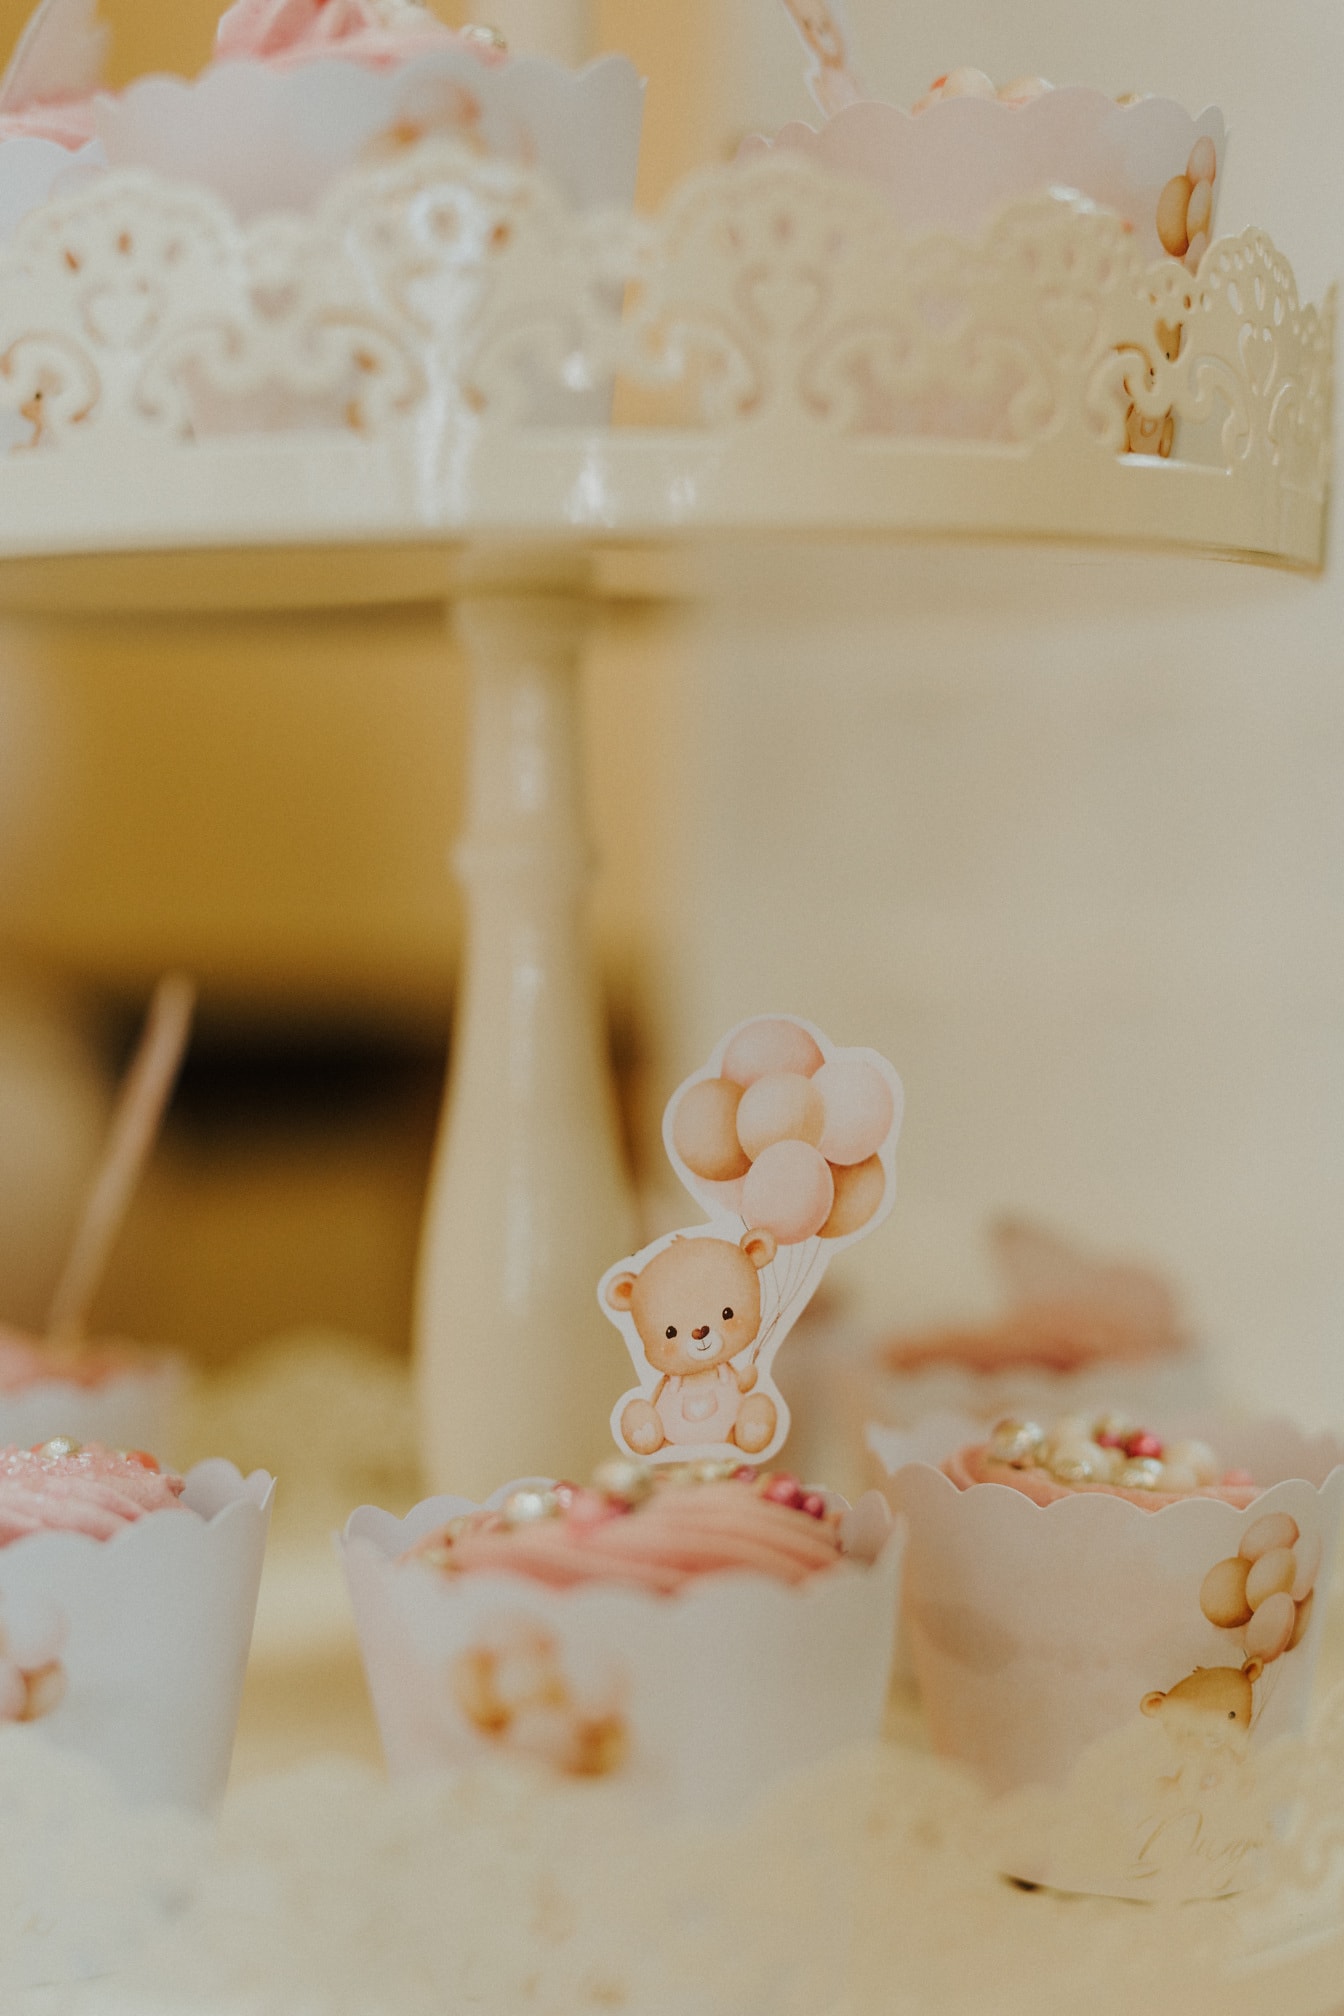 Close-up of teddy bear toy decoration on cupcake